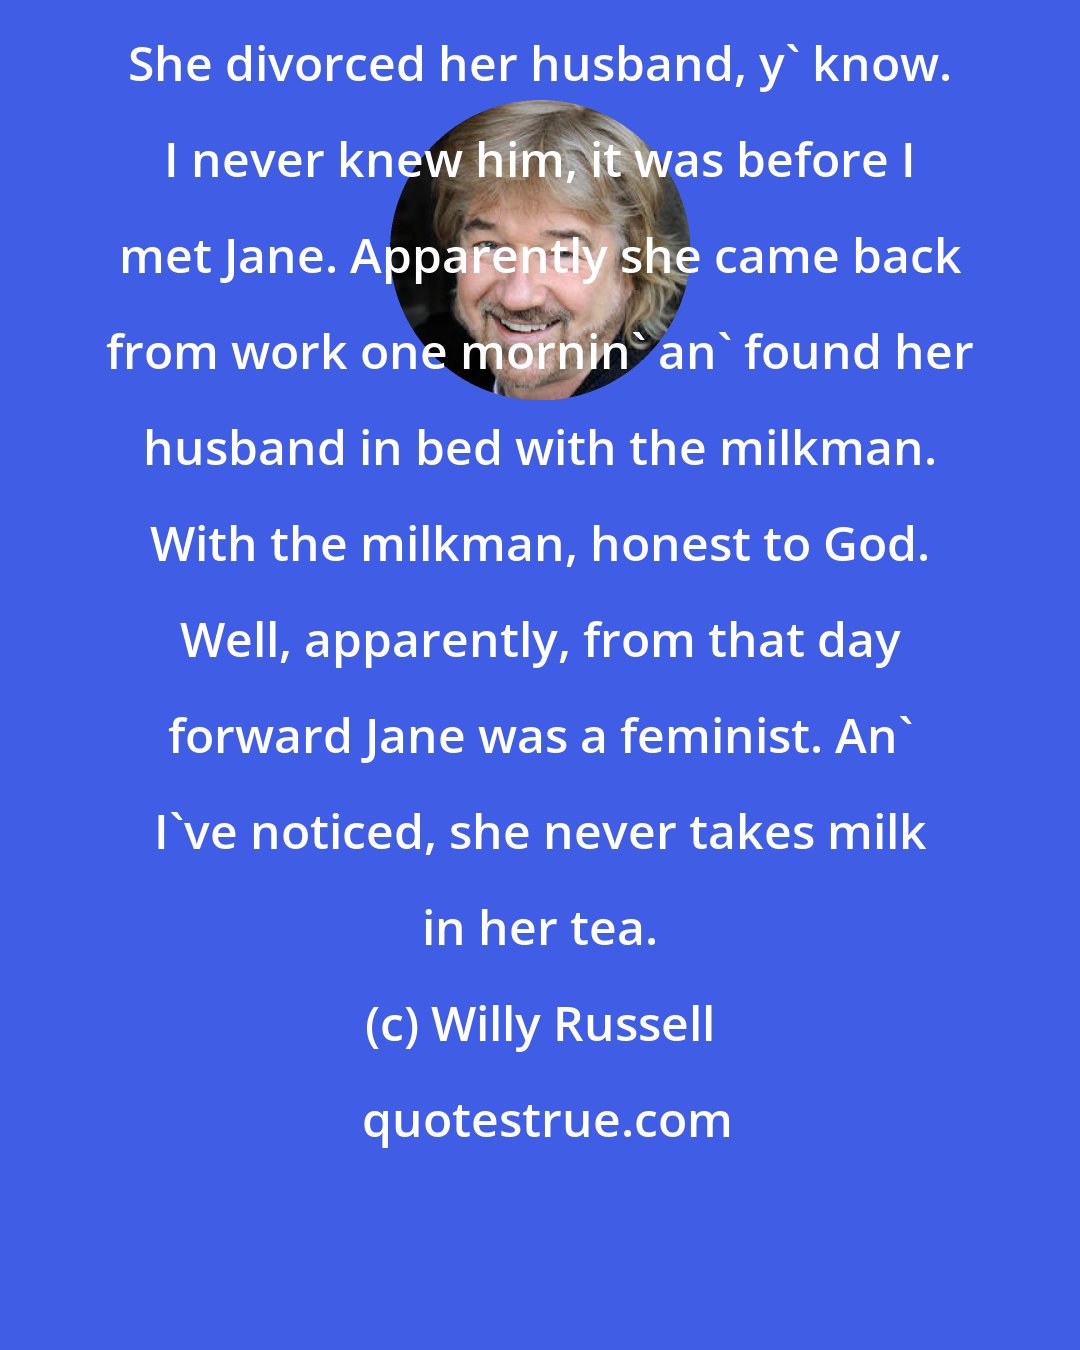 Willy Russell: She divorced her husband, y' know. I never knew him, it was before I met Jane. Apparently she came back from work one mornin' an' found her husband in bed with the milkman. With the milkman, honest to God. Well, apparently, from that day forward Jane was a feminist. An' I've noticed, she never takes milk in her tea.